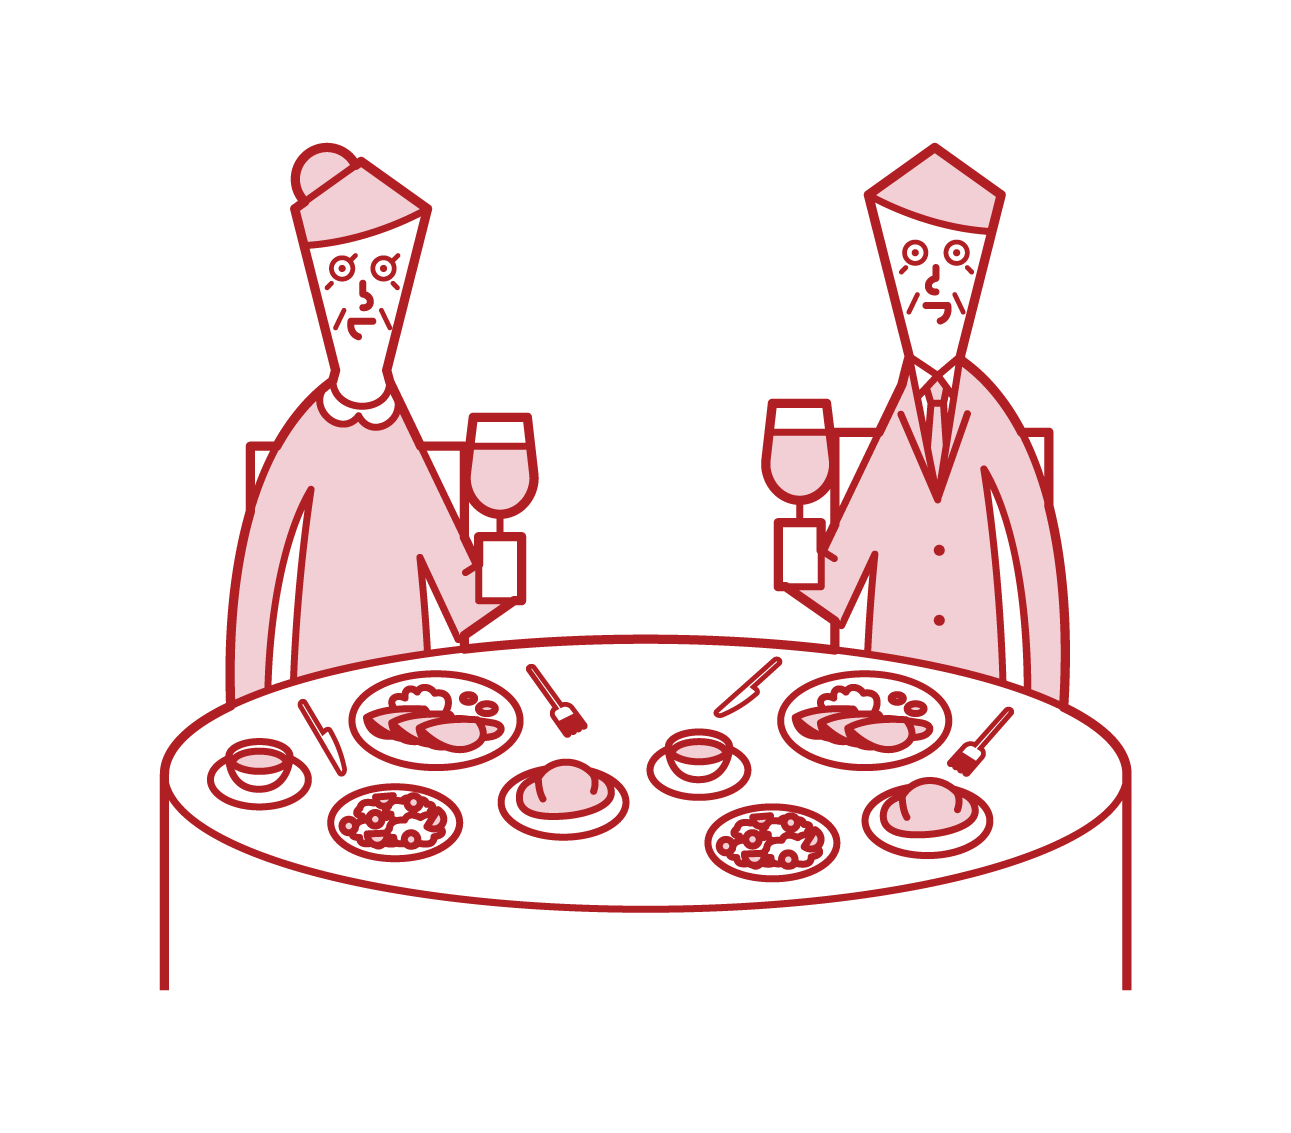 Illustration of an elderly couple eating deliciously in a restaurant